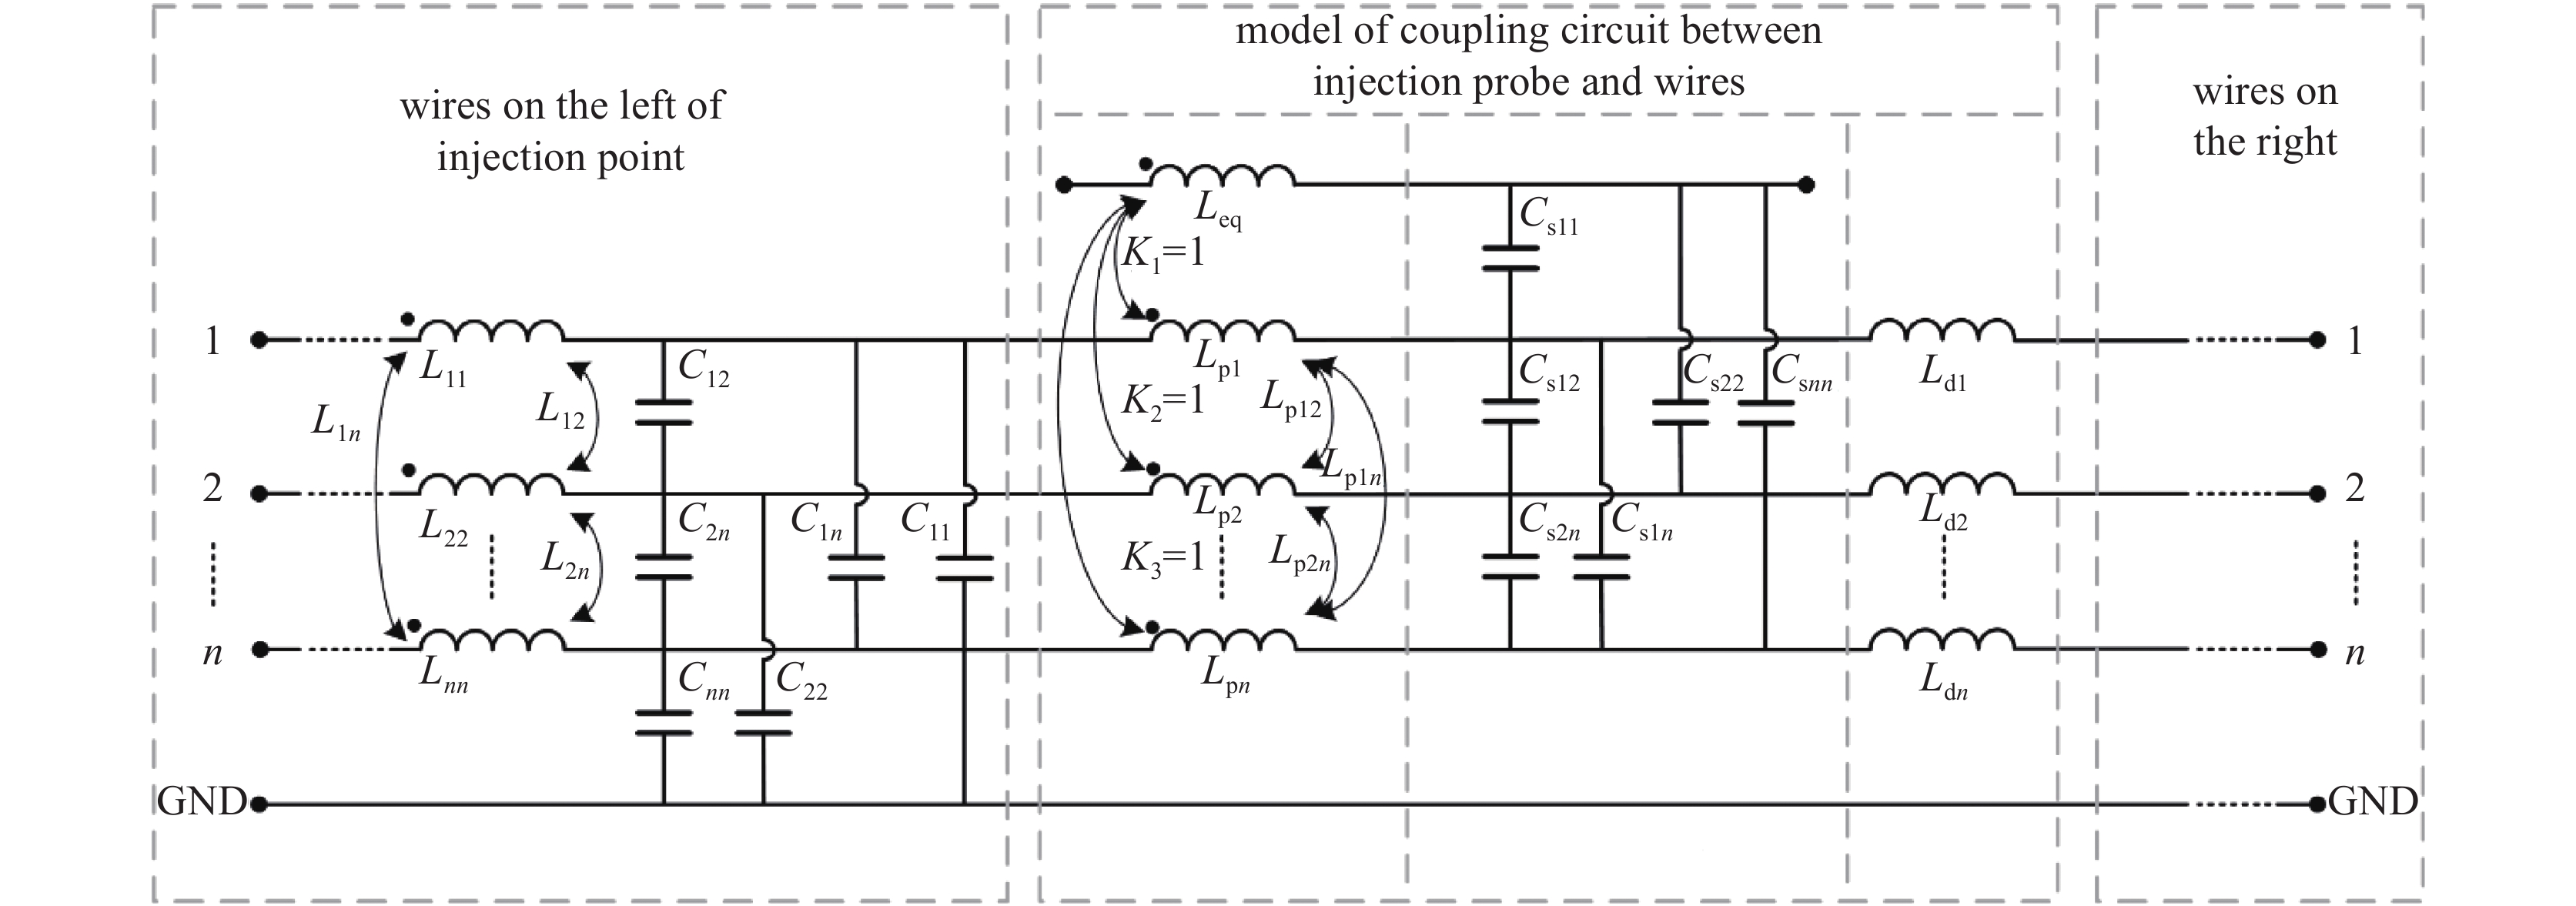 Circuit model of CS115 injected on wire bundles